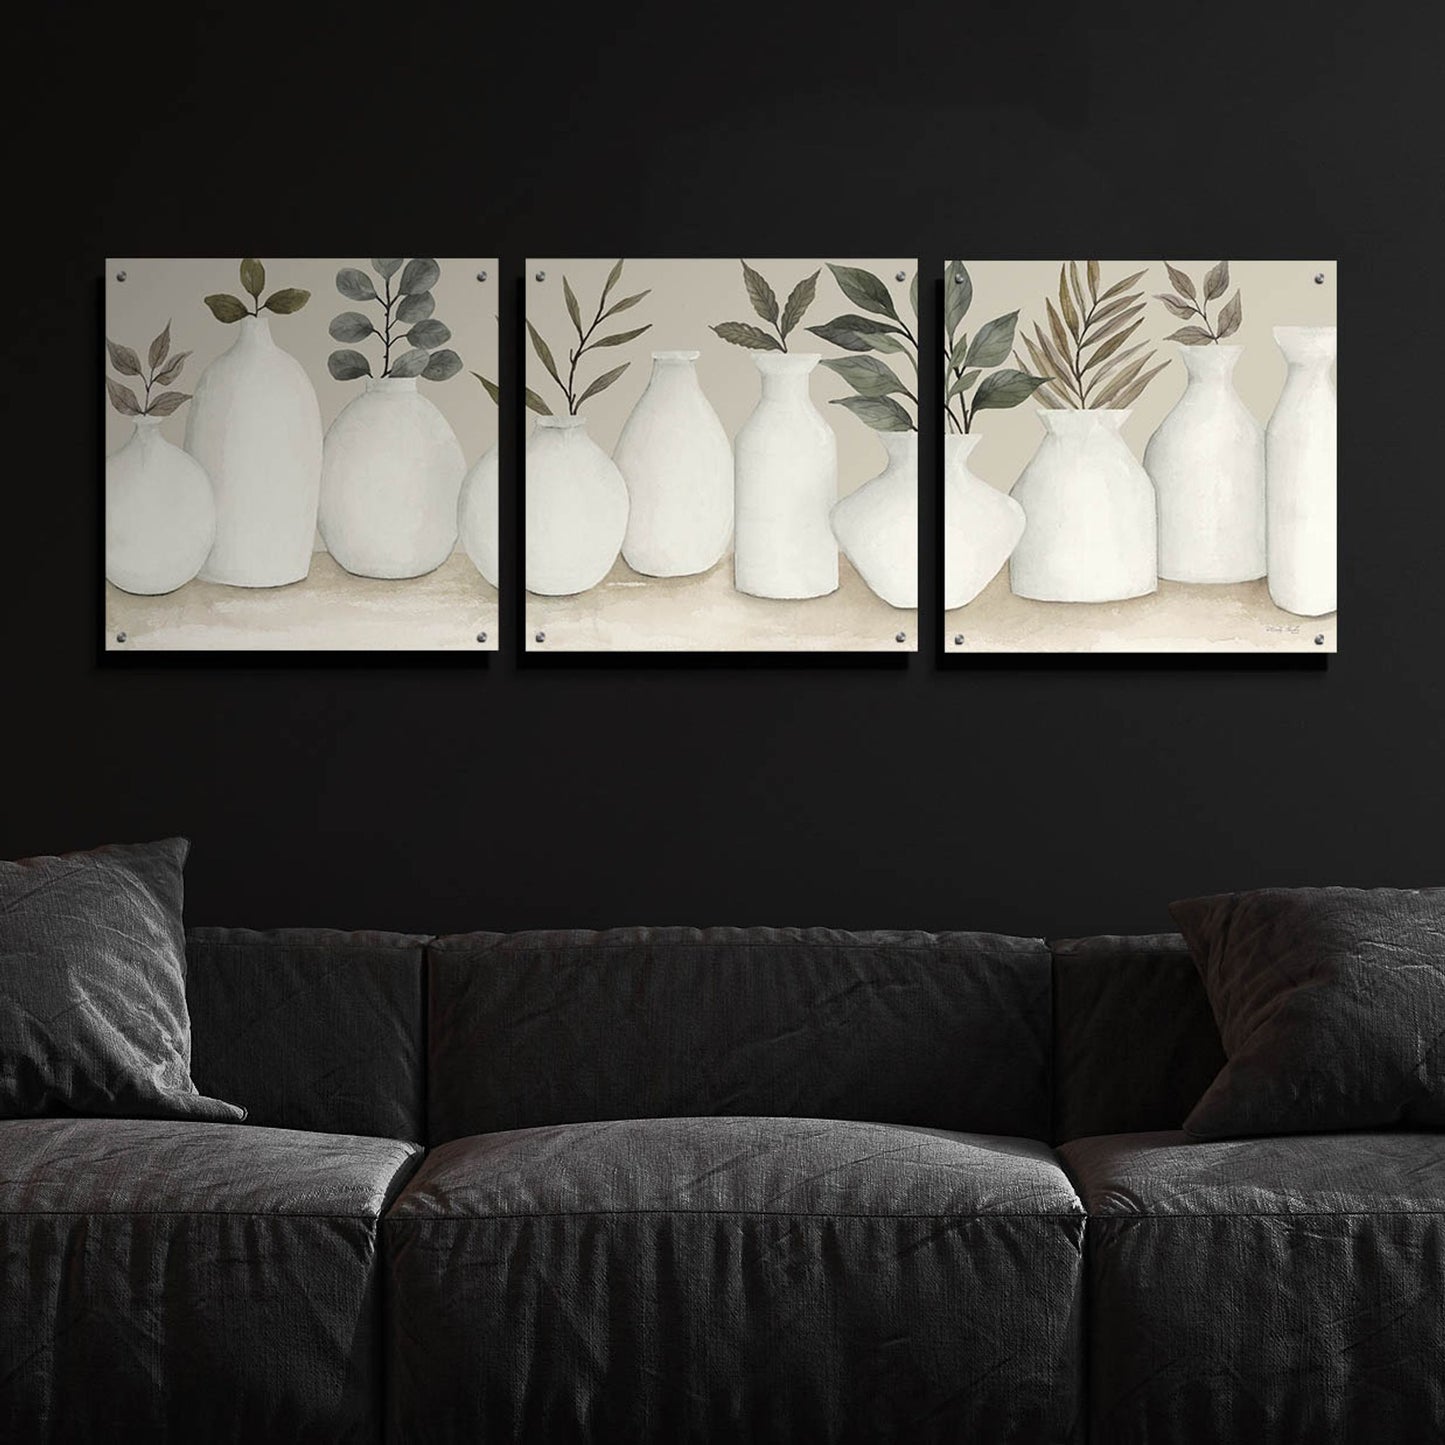 Epic Art 'Ivory Vases in a Row' by Cindy Jacobs, Acrylic Glass Wall Art, 3 Piece Set,72x24